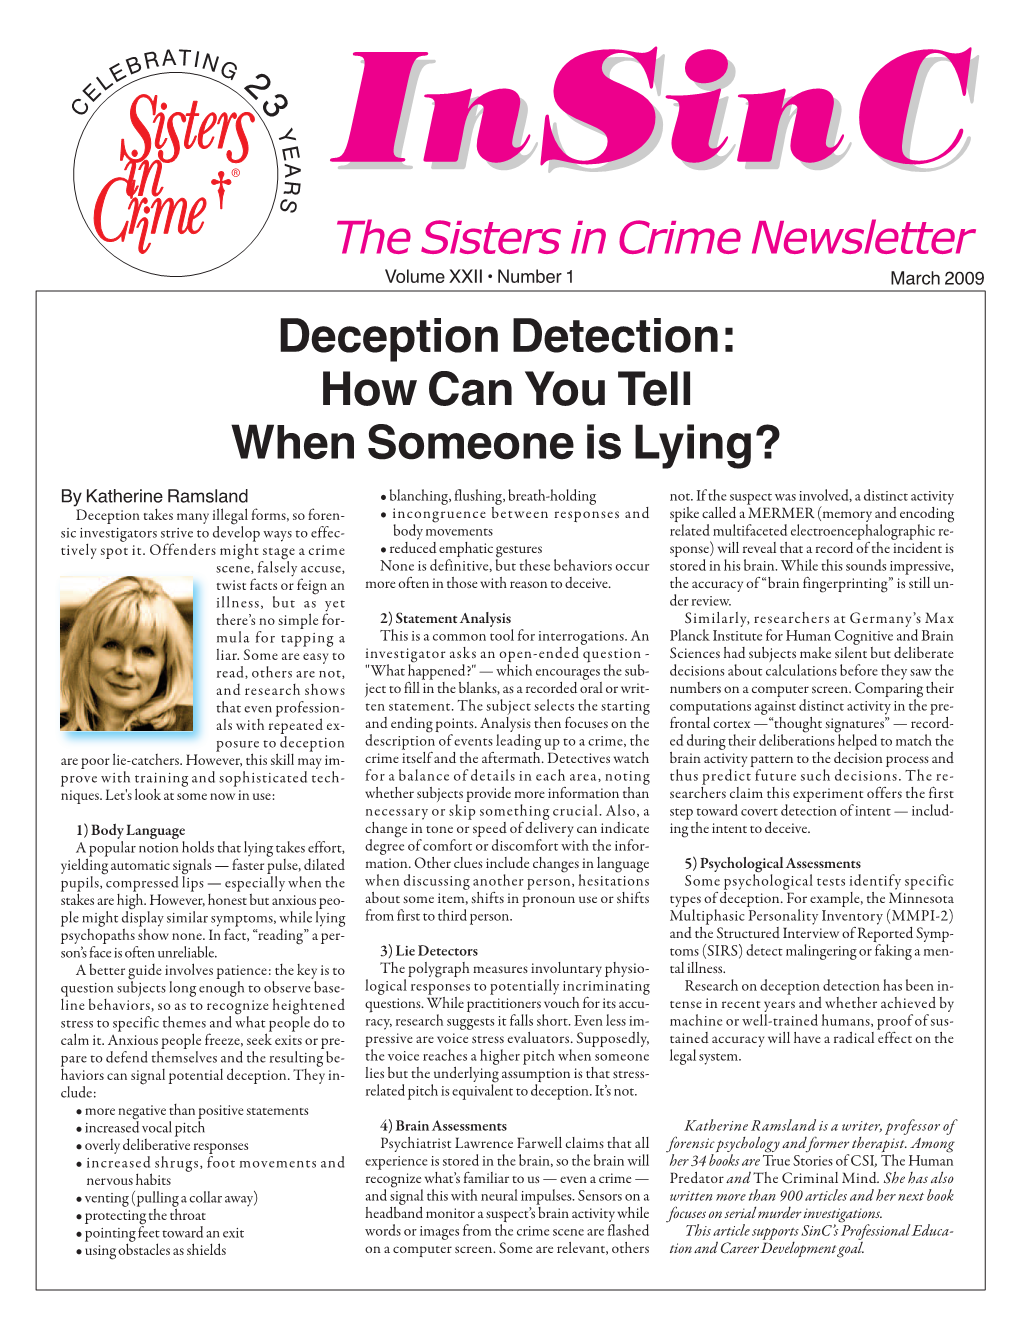 Deception Detection: How Can You Tell When Someone Is Lying?